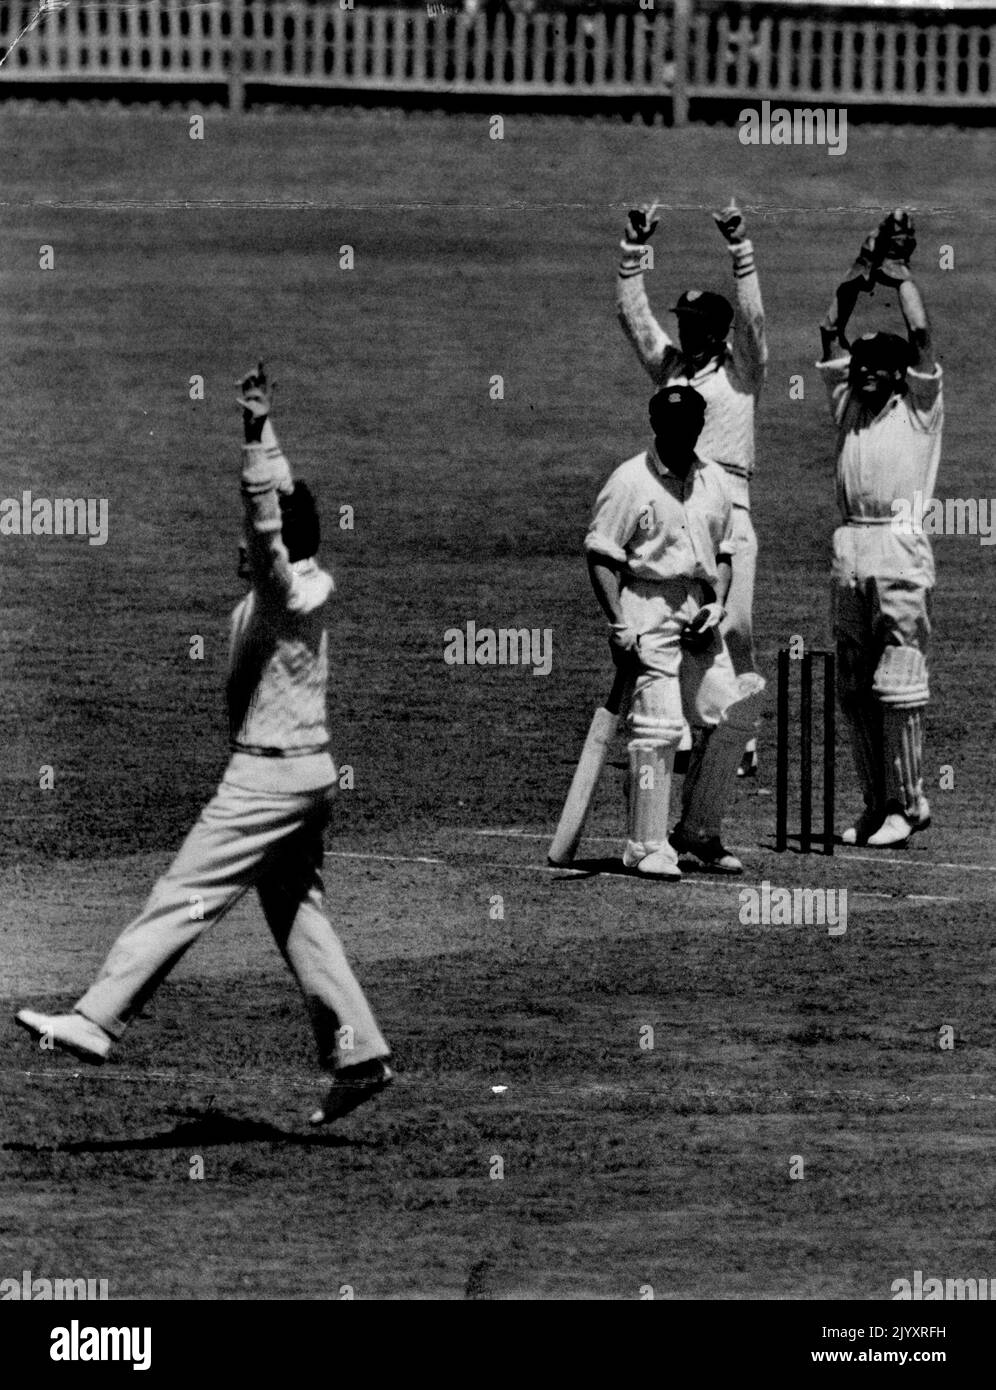 WA Batsman Lester Charlesworth caught by 'keeper Sismey in today's Shield match at the SCG. NSW captain Keith Miller leads a unanimous appeal. November 07, 1949. Stock Photo